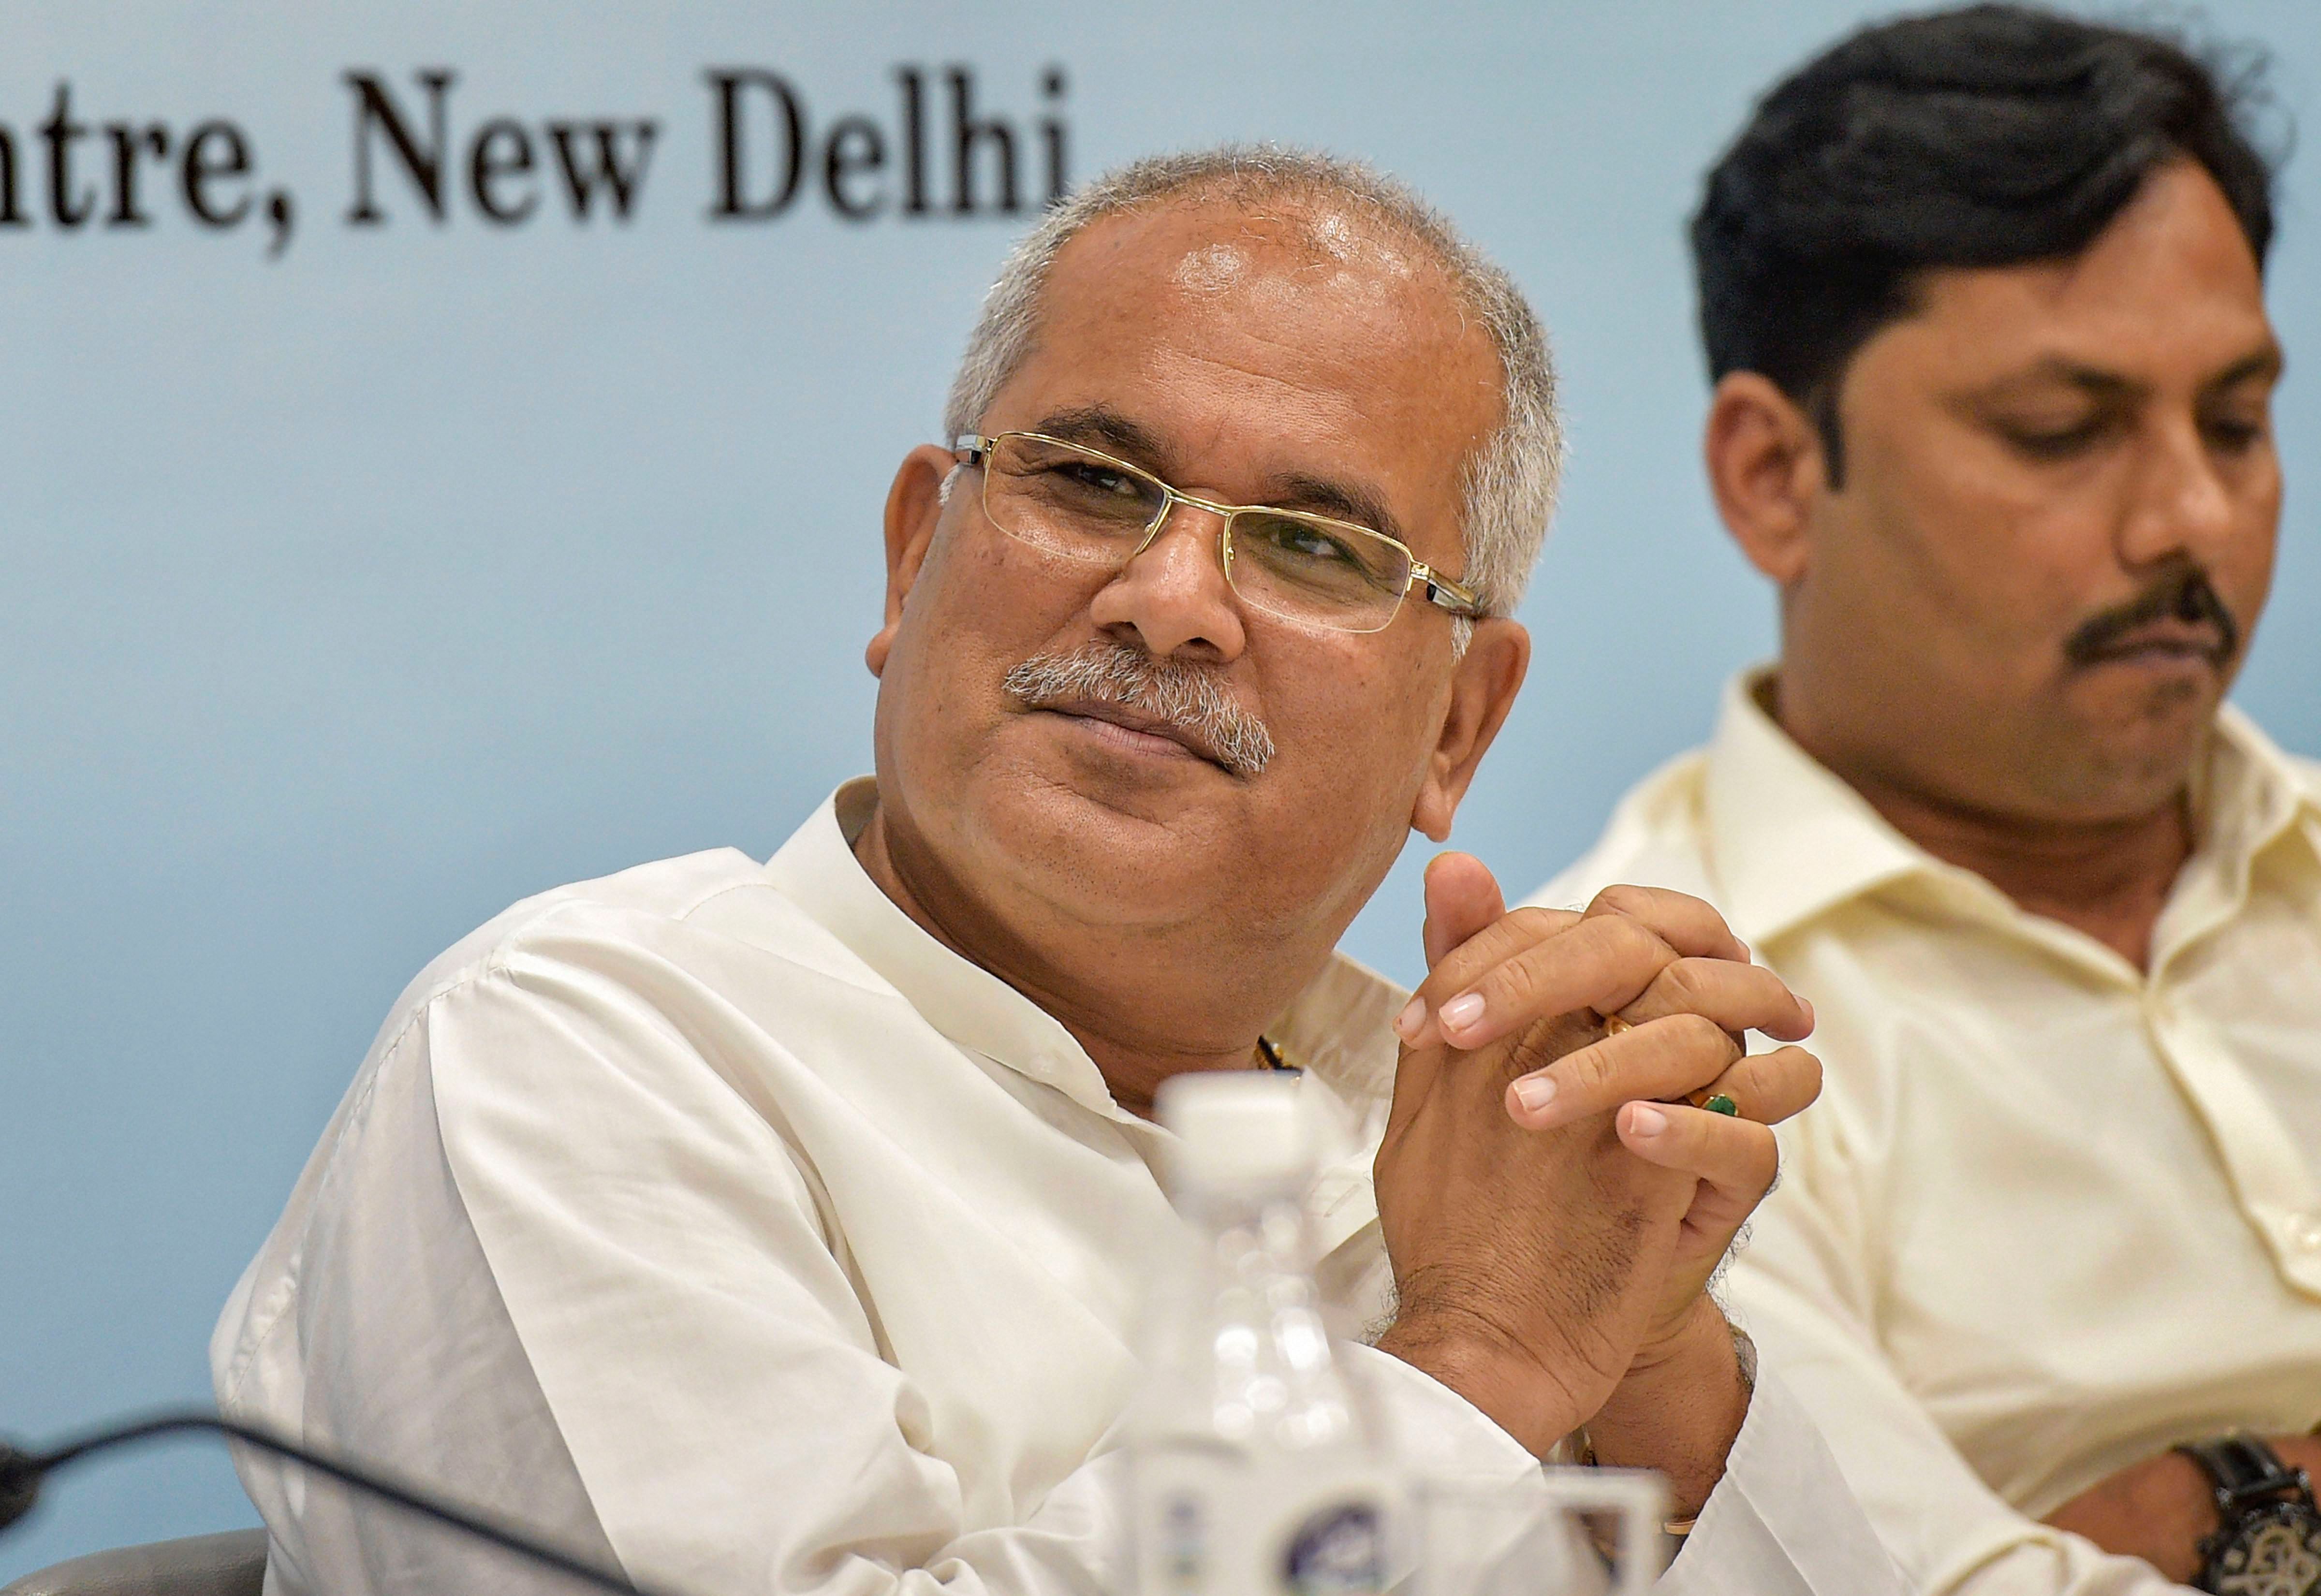 Chhattisgarh Chief Minister Bhupesh Baghel during his address to thinkers, policy analysts and diplomats at India International Centre (IIC), New Delhi. (PTI Photo)